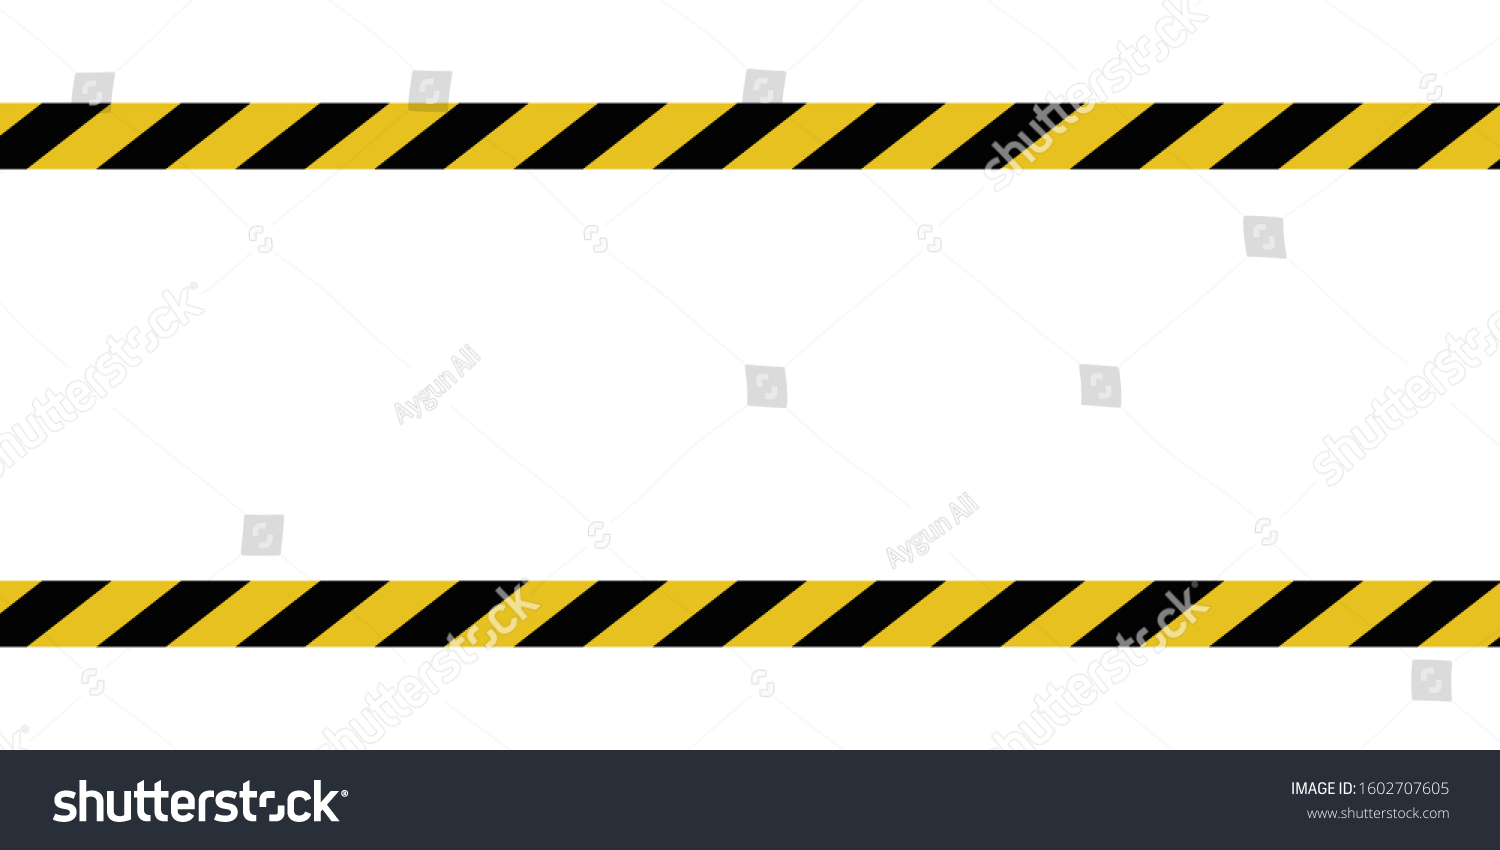 SVG of Yellow and Black Striped Hazard Tape Lines Isolated on White warning line striped background diagonal, careful of the potential danger Caution vector template sign border police Tape svg